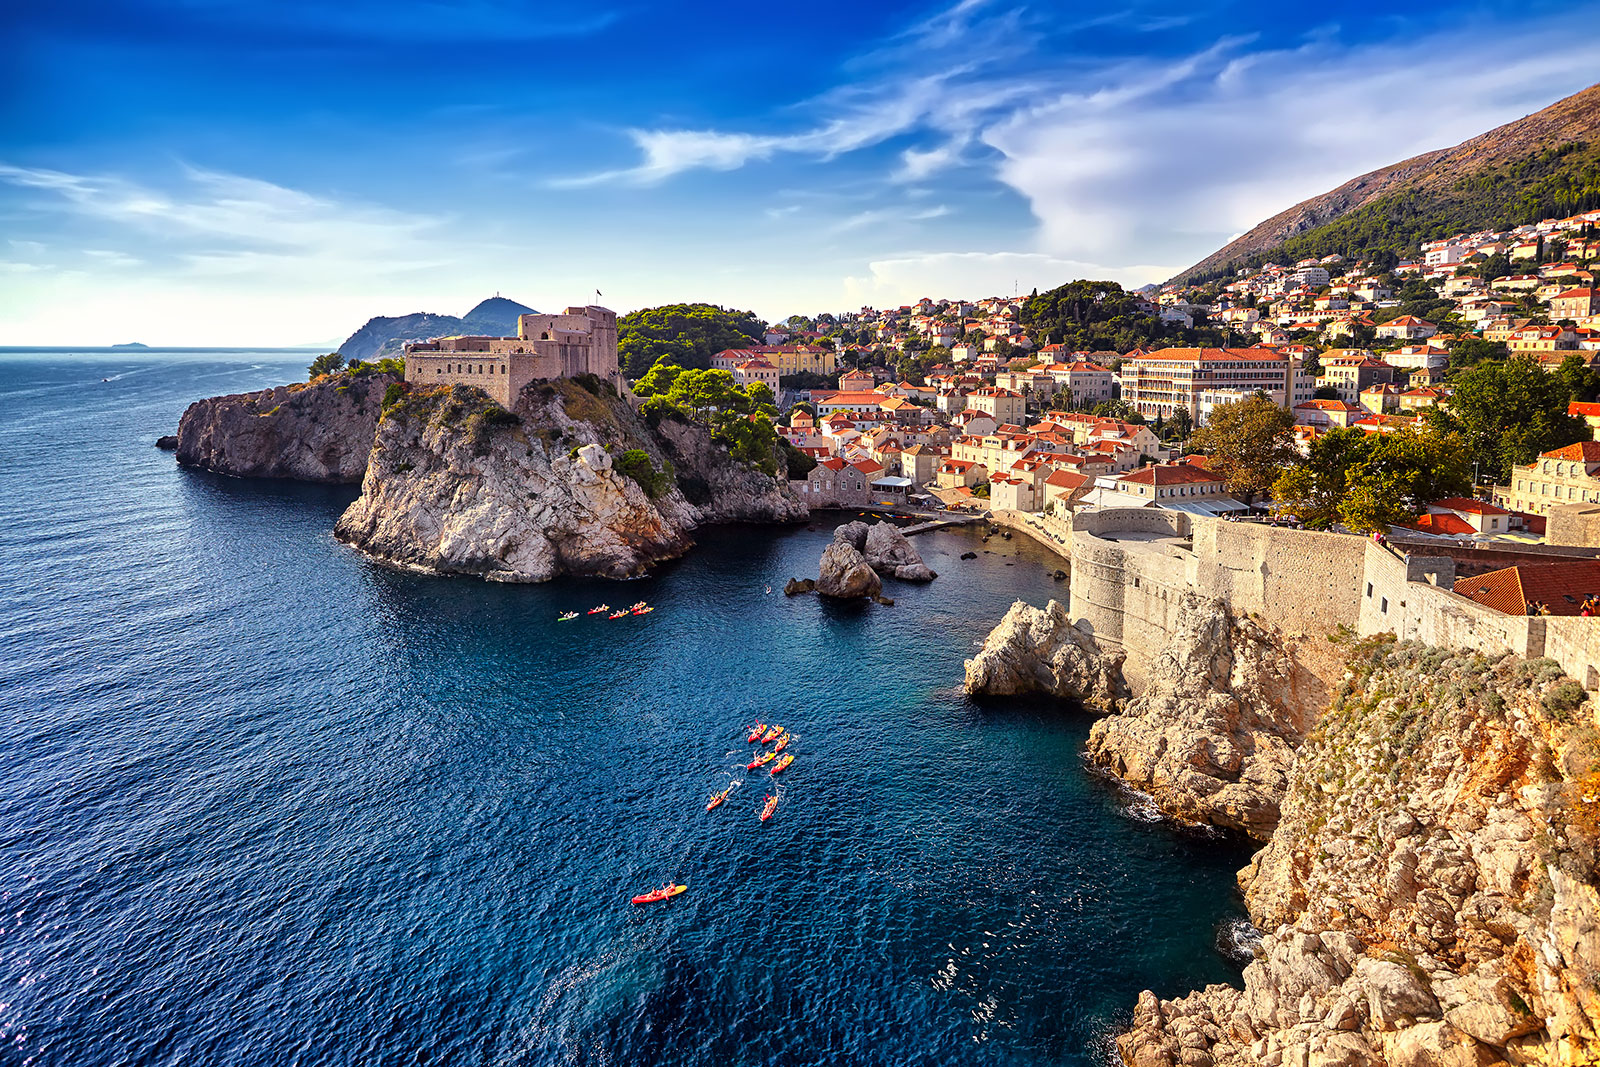 travelling on a budget in Dubrovnik